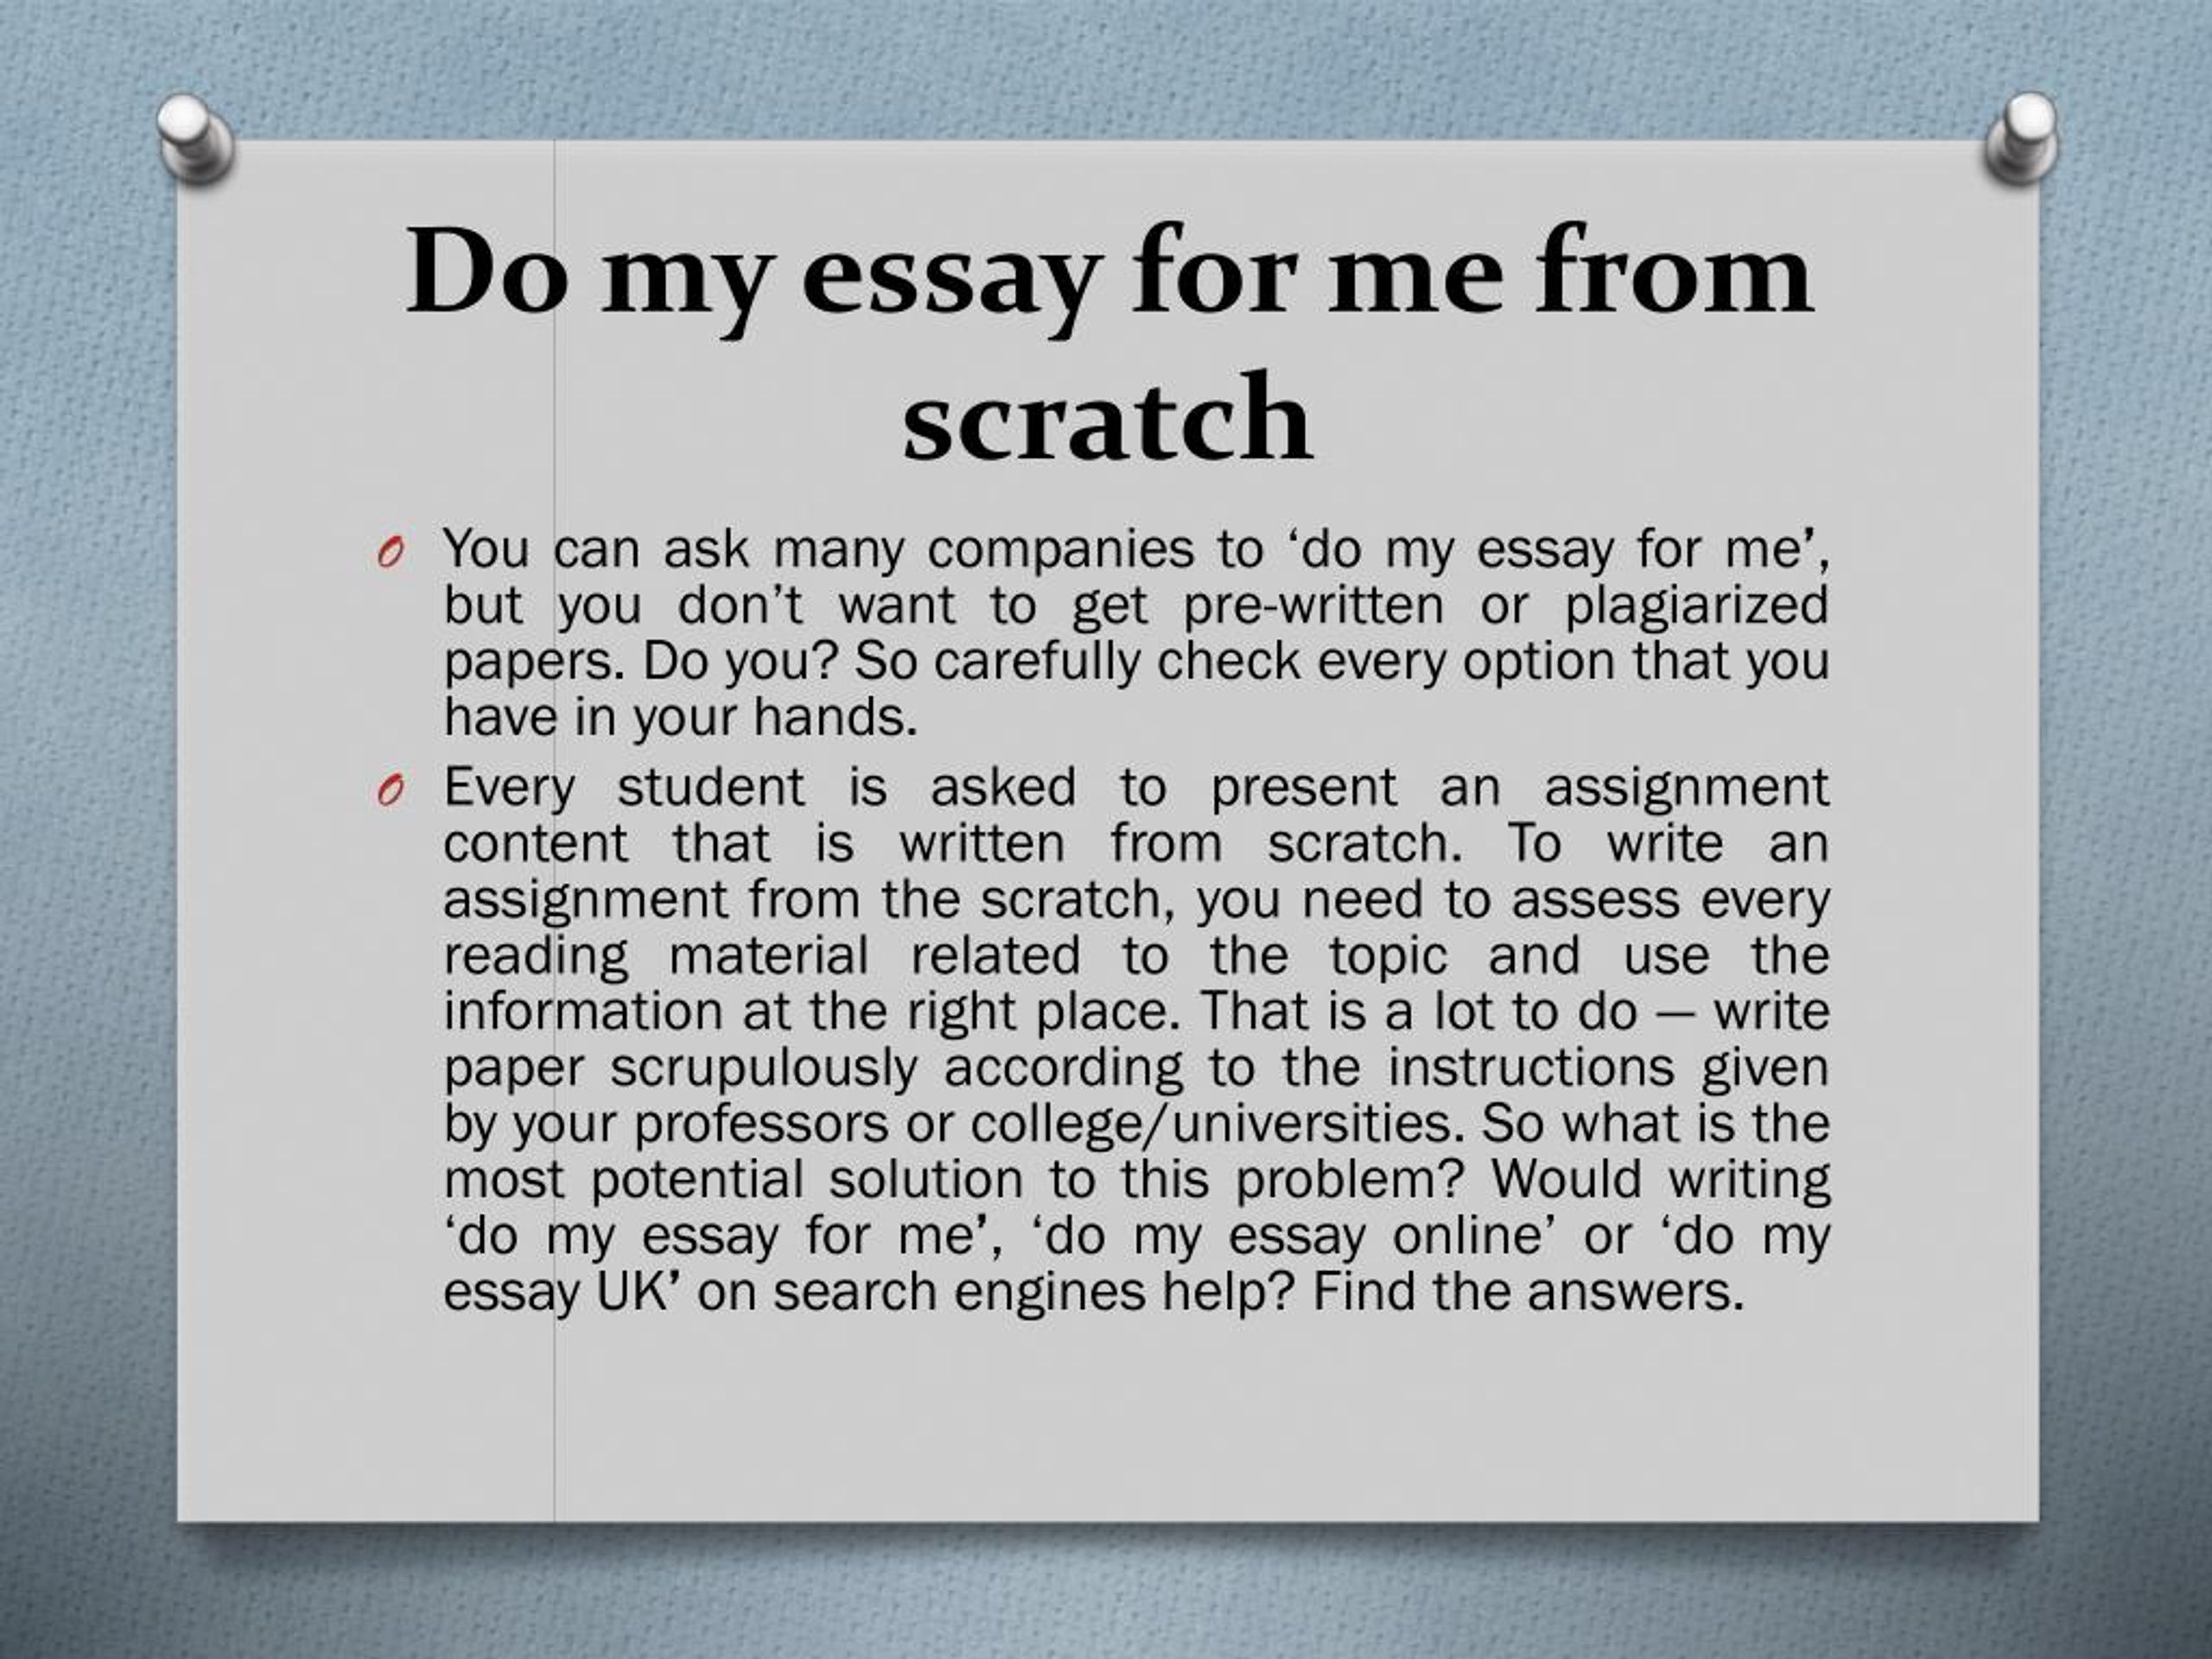 Do my paper for me